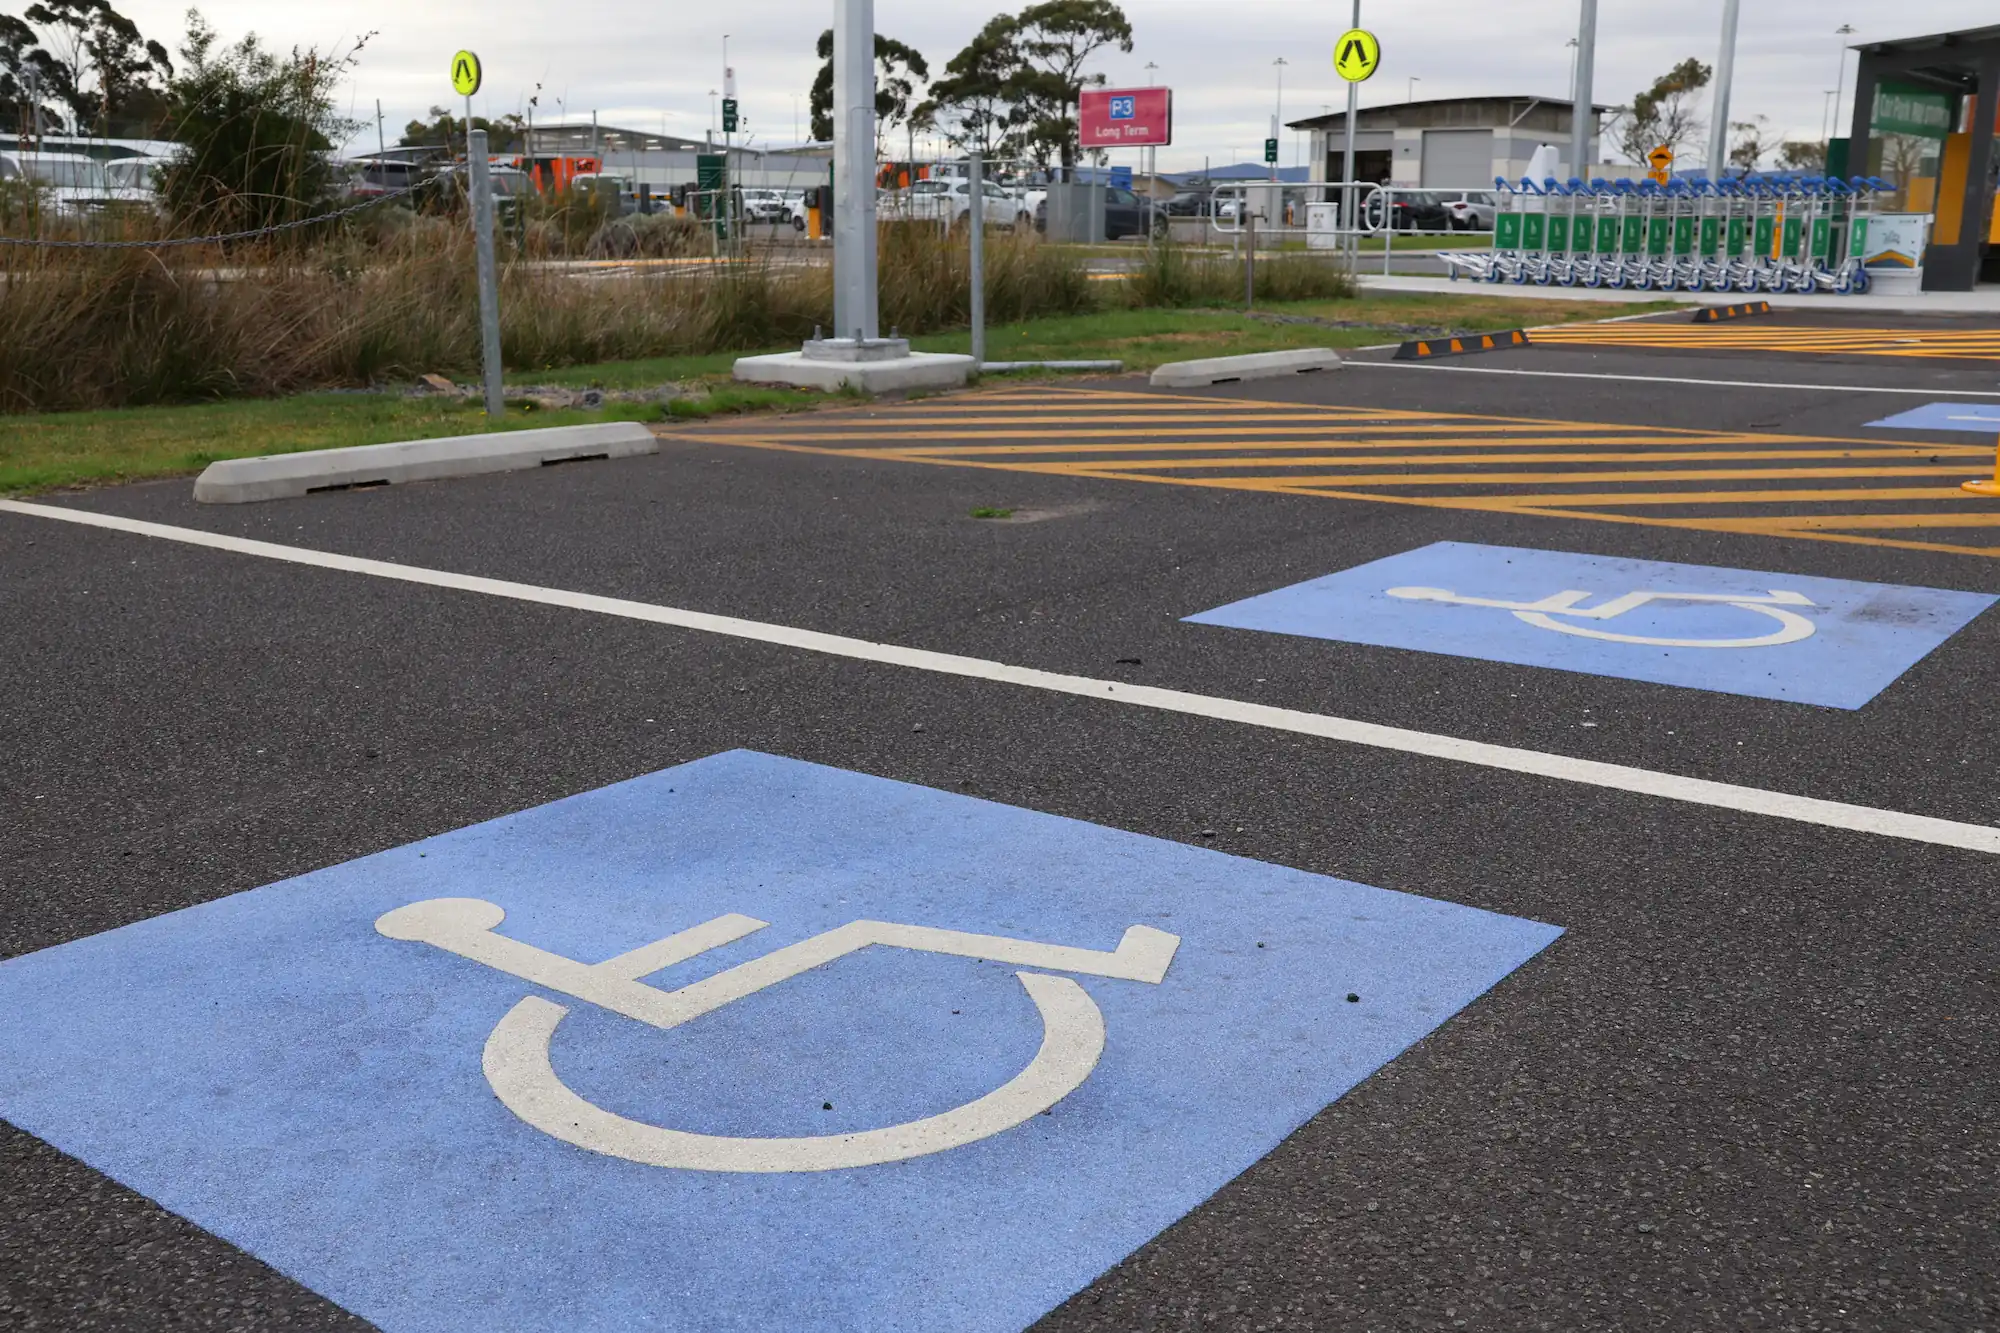 A designated disabled parking spot, located next to footpaths